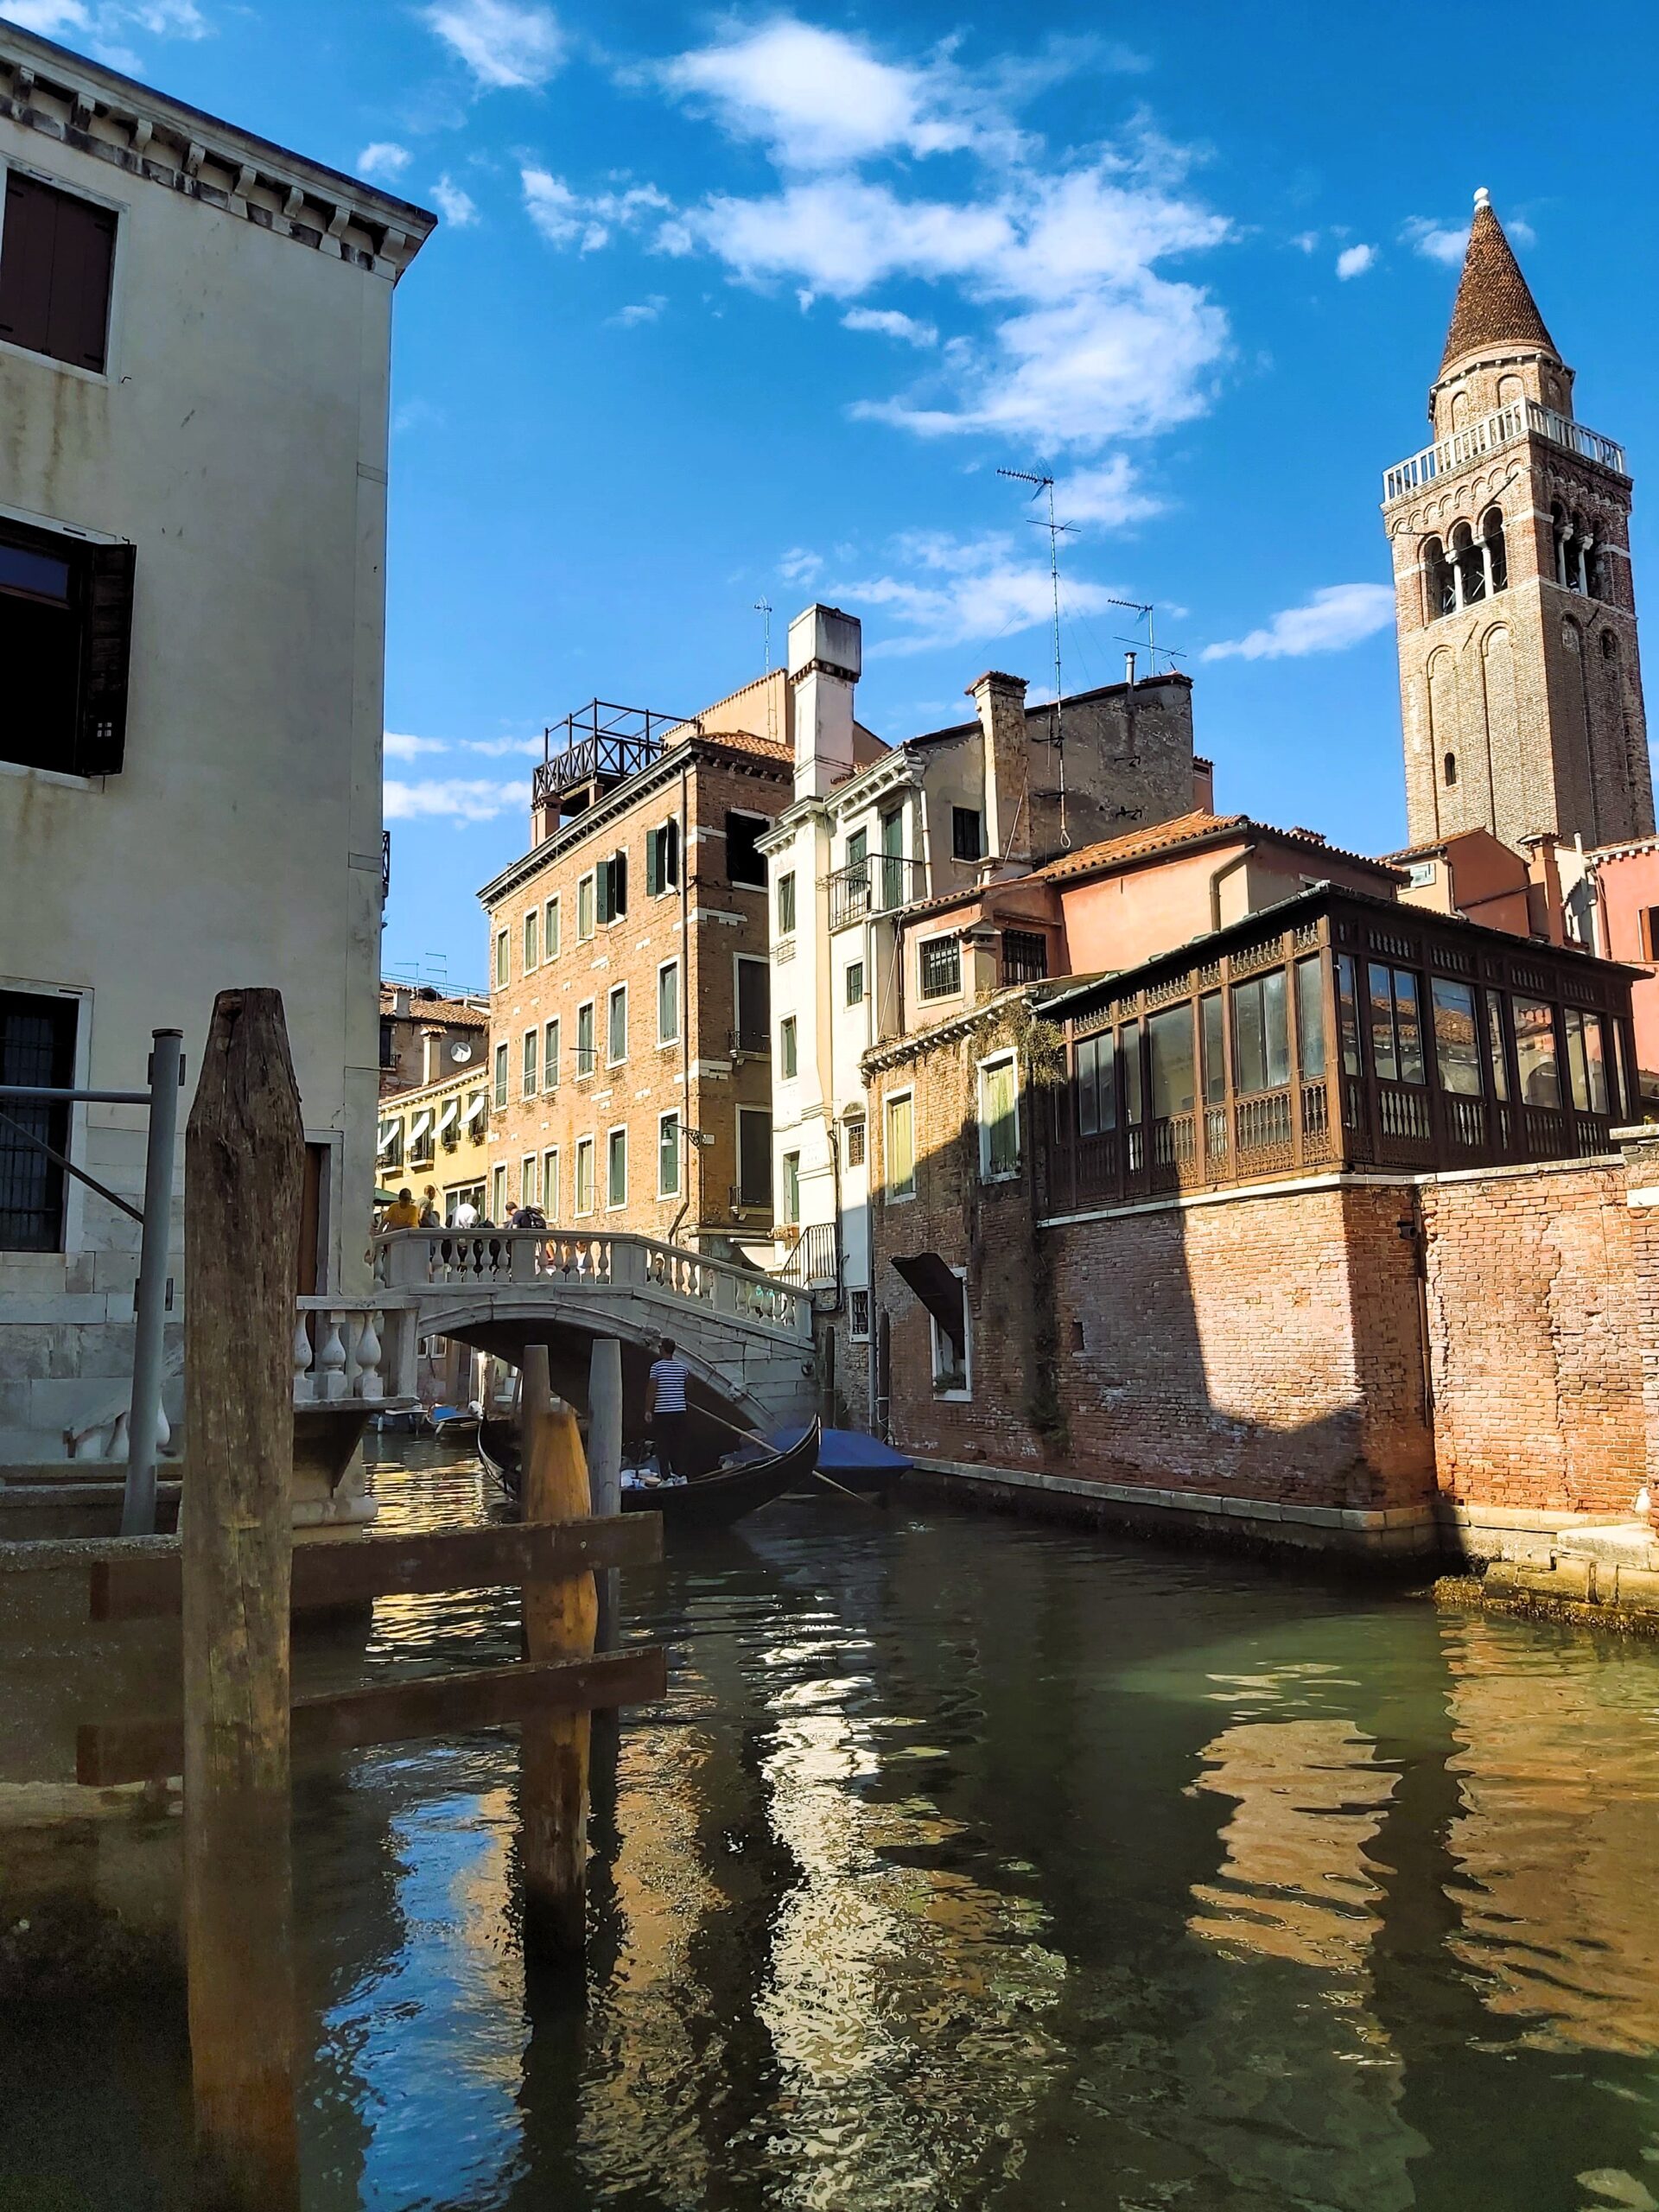 A view of several different styled buildings and a bridge in Venice, Italy